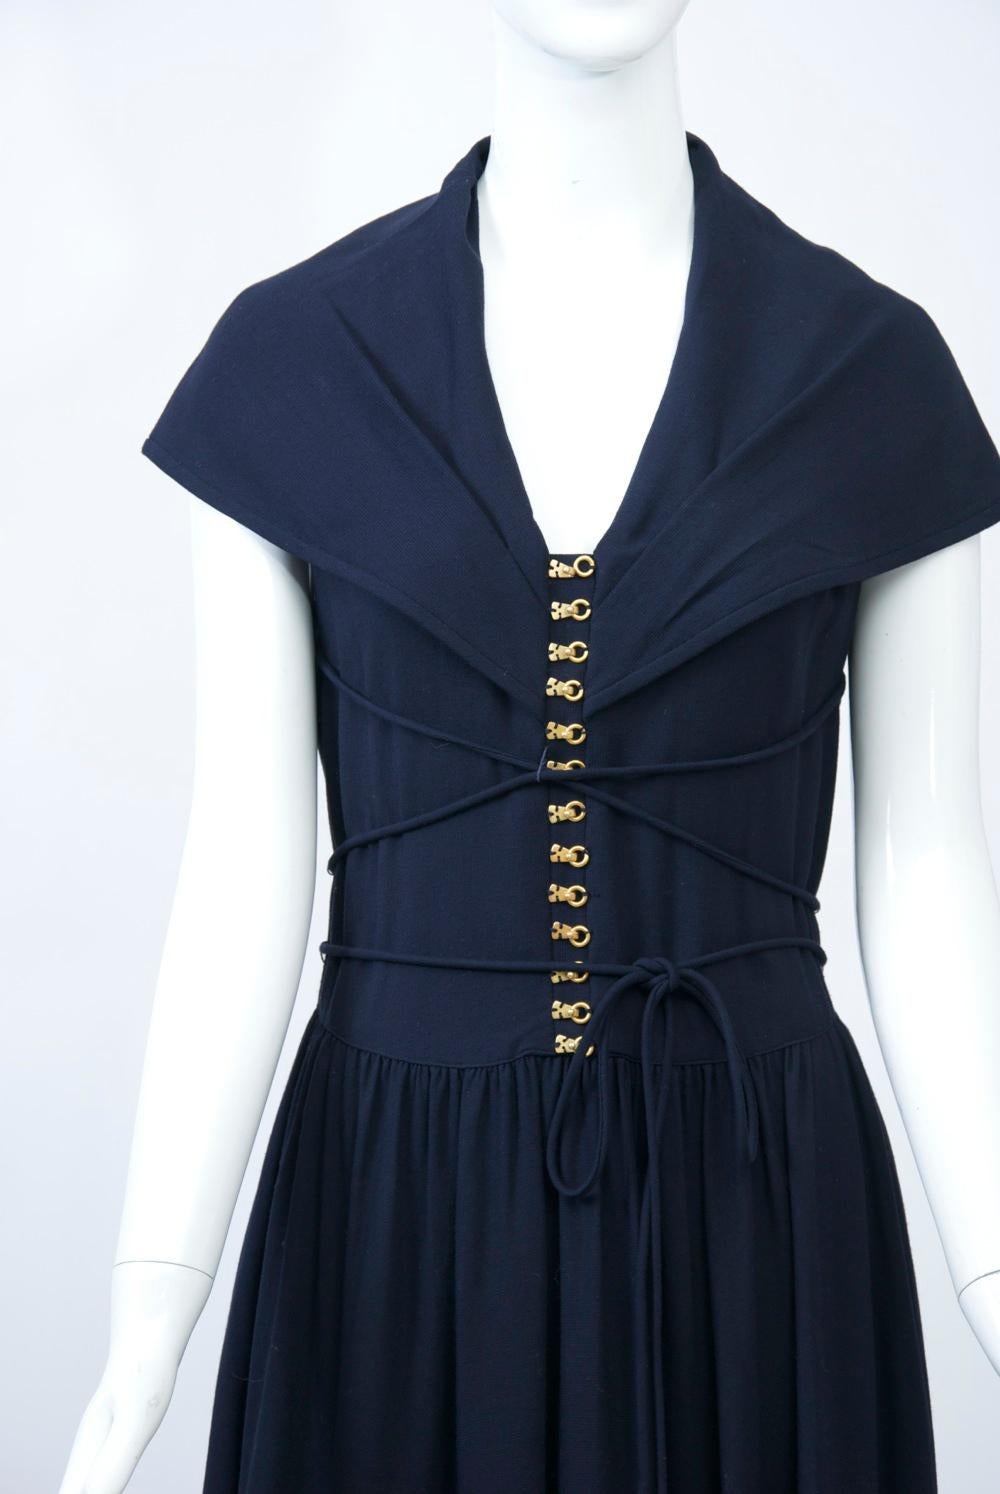 Long dress in navy wool/acrylic blend featuring a long torso with metal skate hooks laced with narrow self belt, and a large sailor collar that covers the upper arms and descends to a deep V in back. The gathered long skirt begins high on the hip.